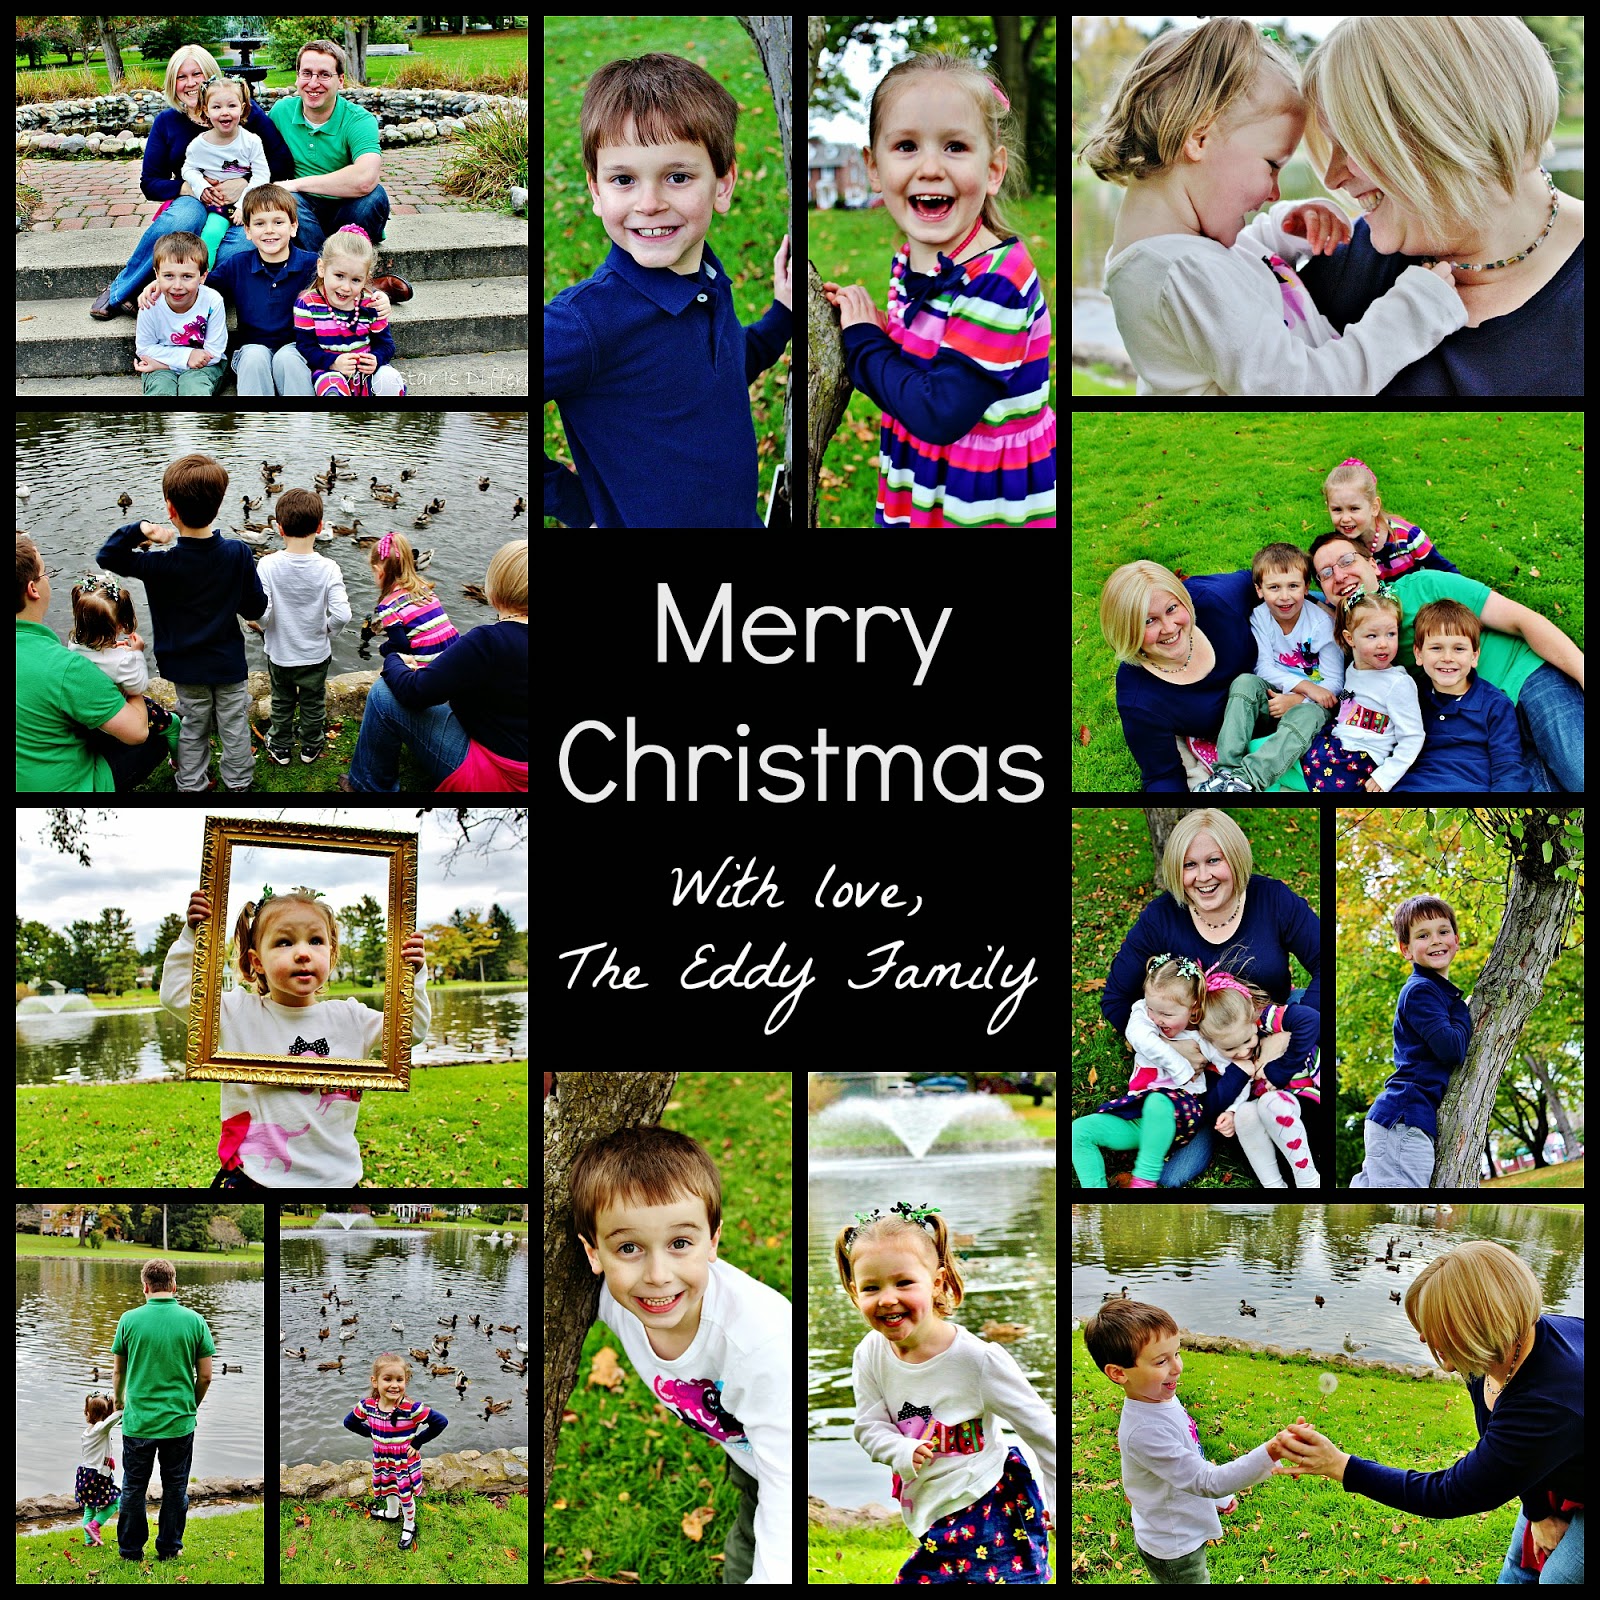 Merry Christmas from the Eddy Family